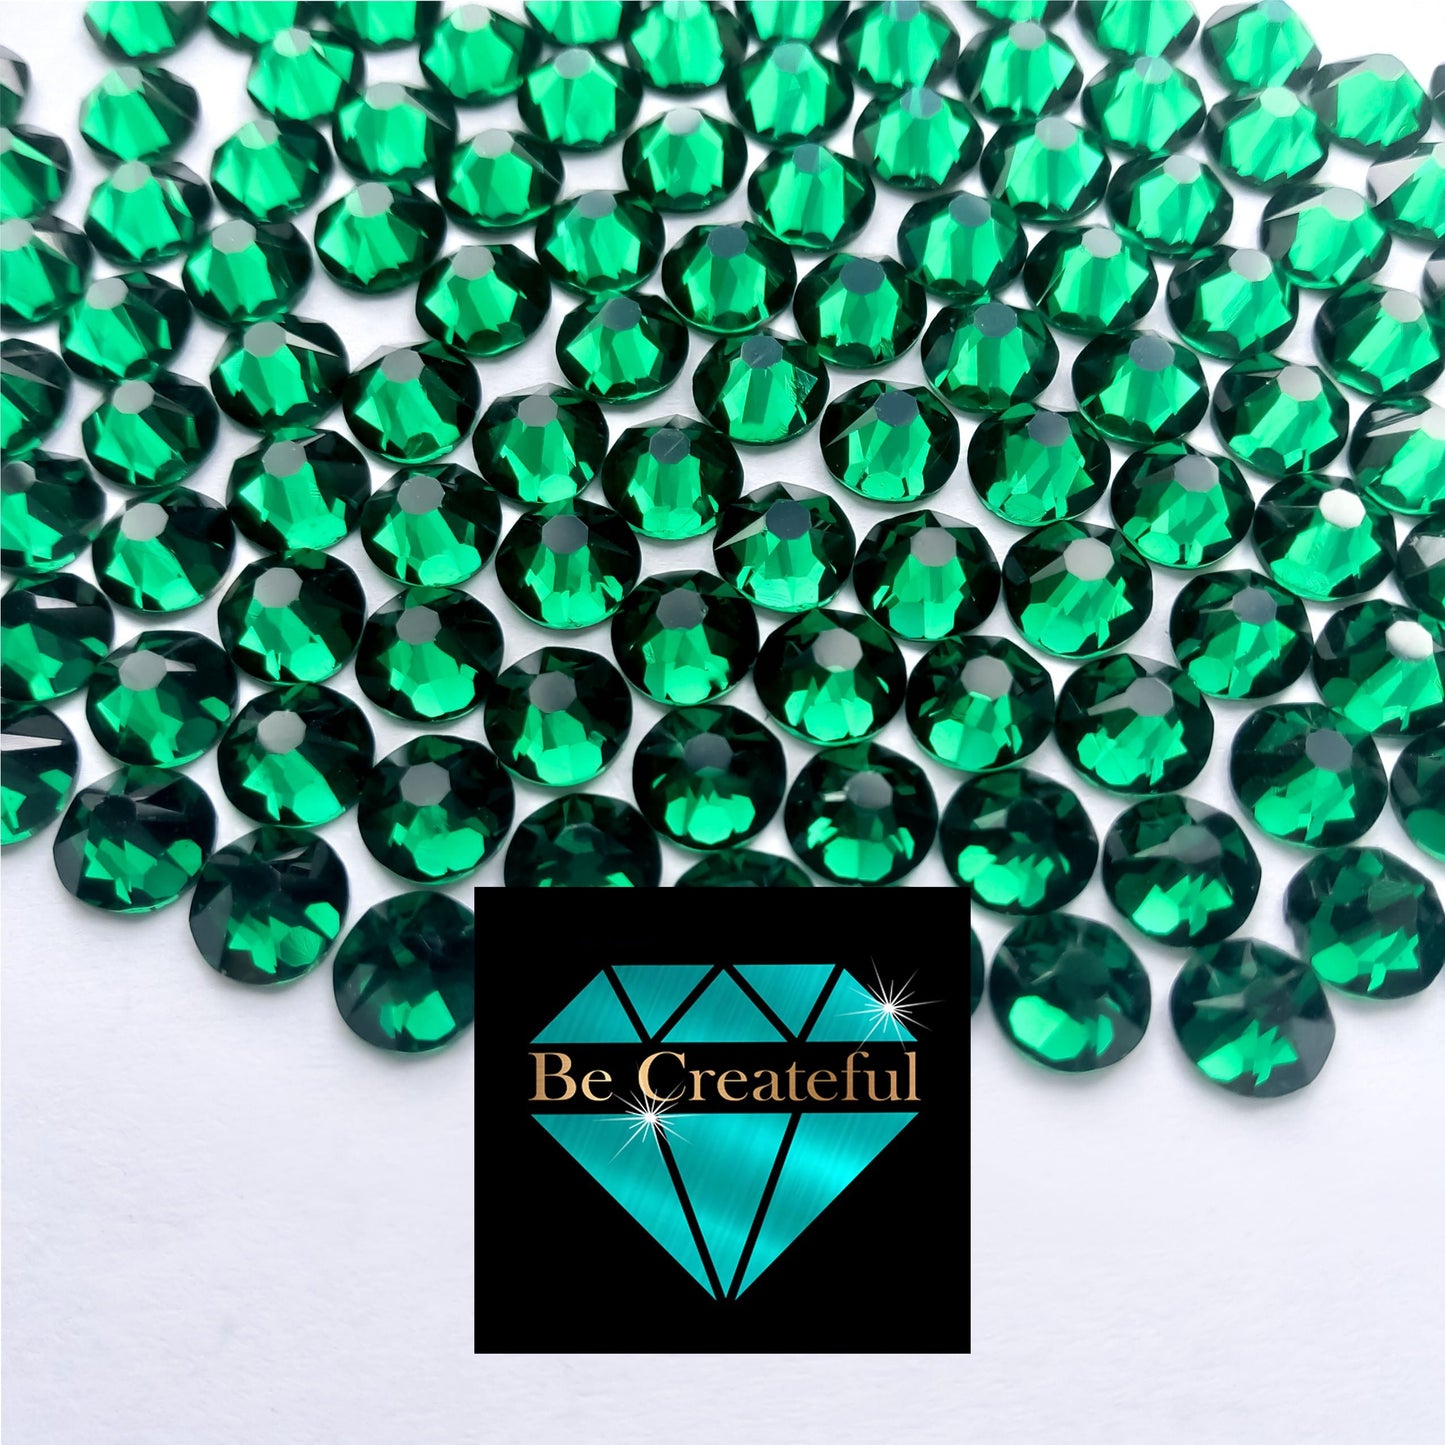 LUXE® Emerald Green Hotfix Rhinestones are high-quality 16 facet glass Rhinestone with intense sparkle and refraction.